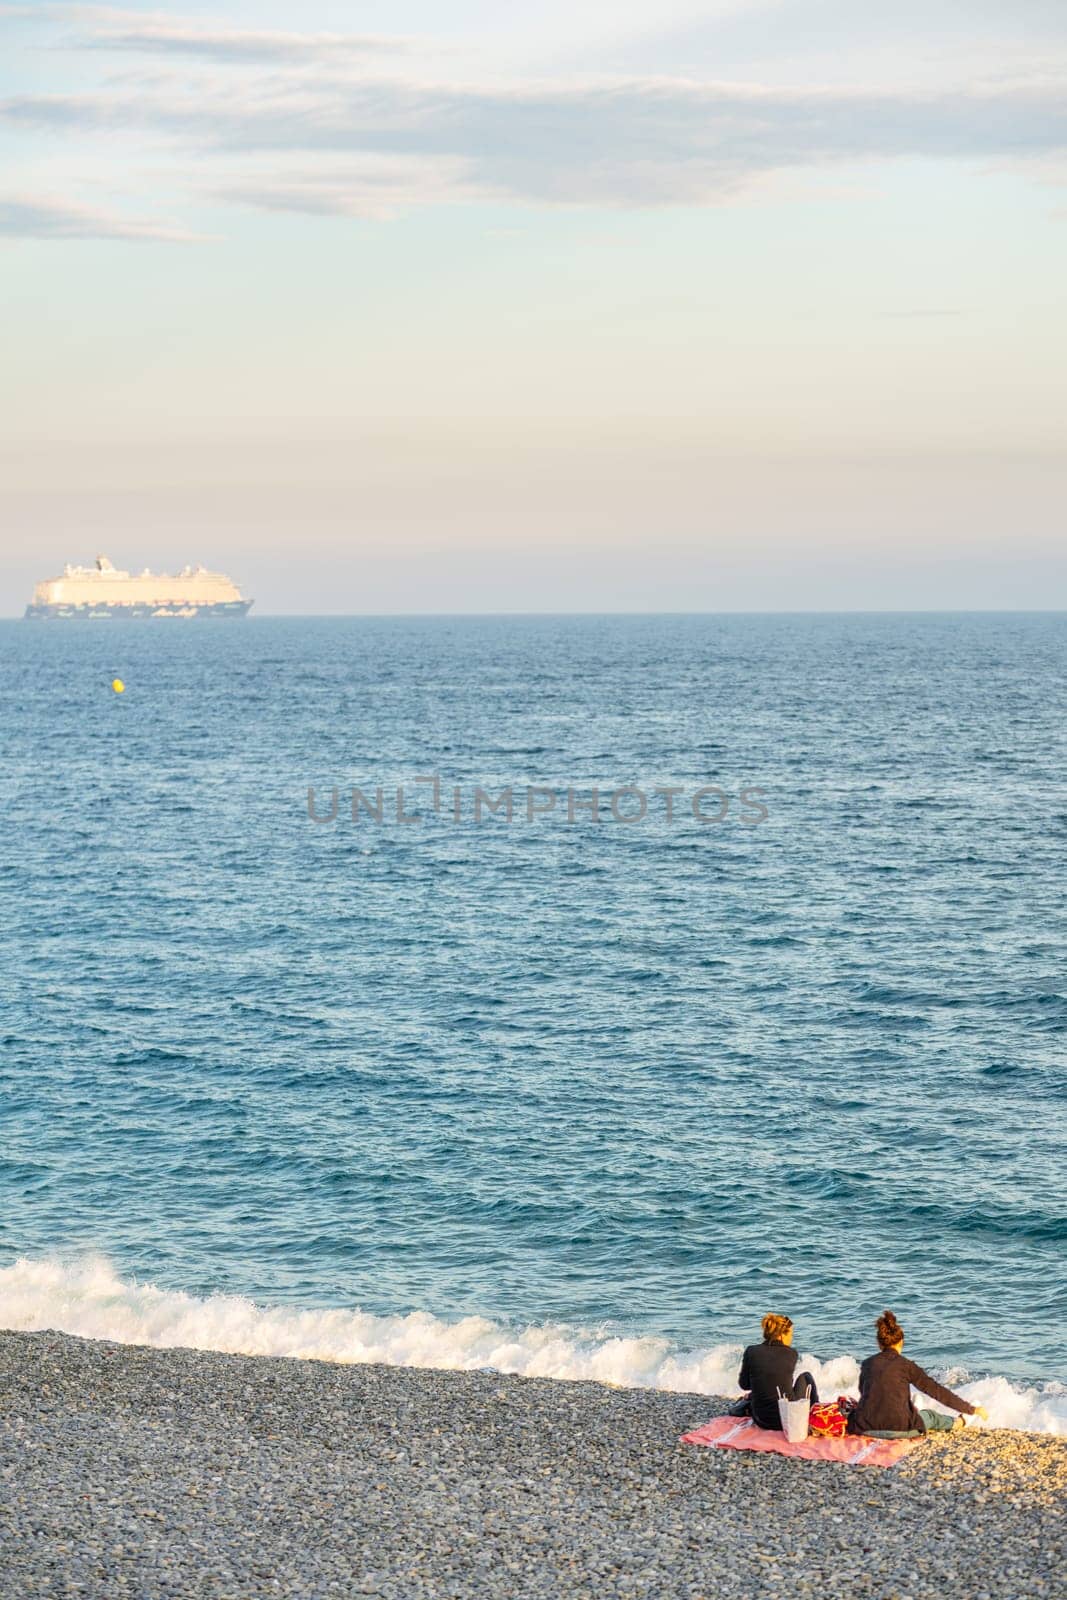 People at the beach in Nice, France, near the Promenade des Anglais